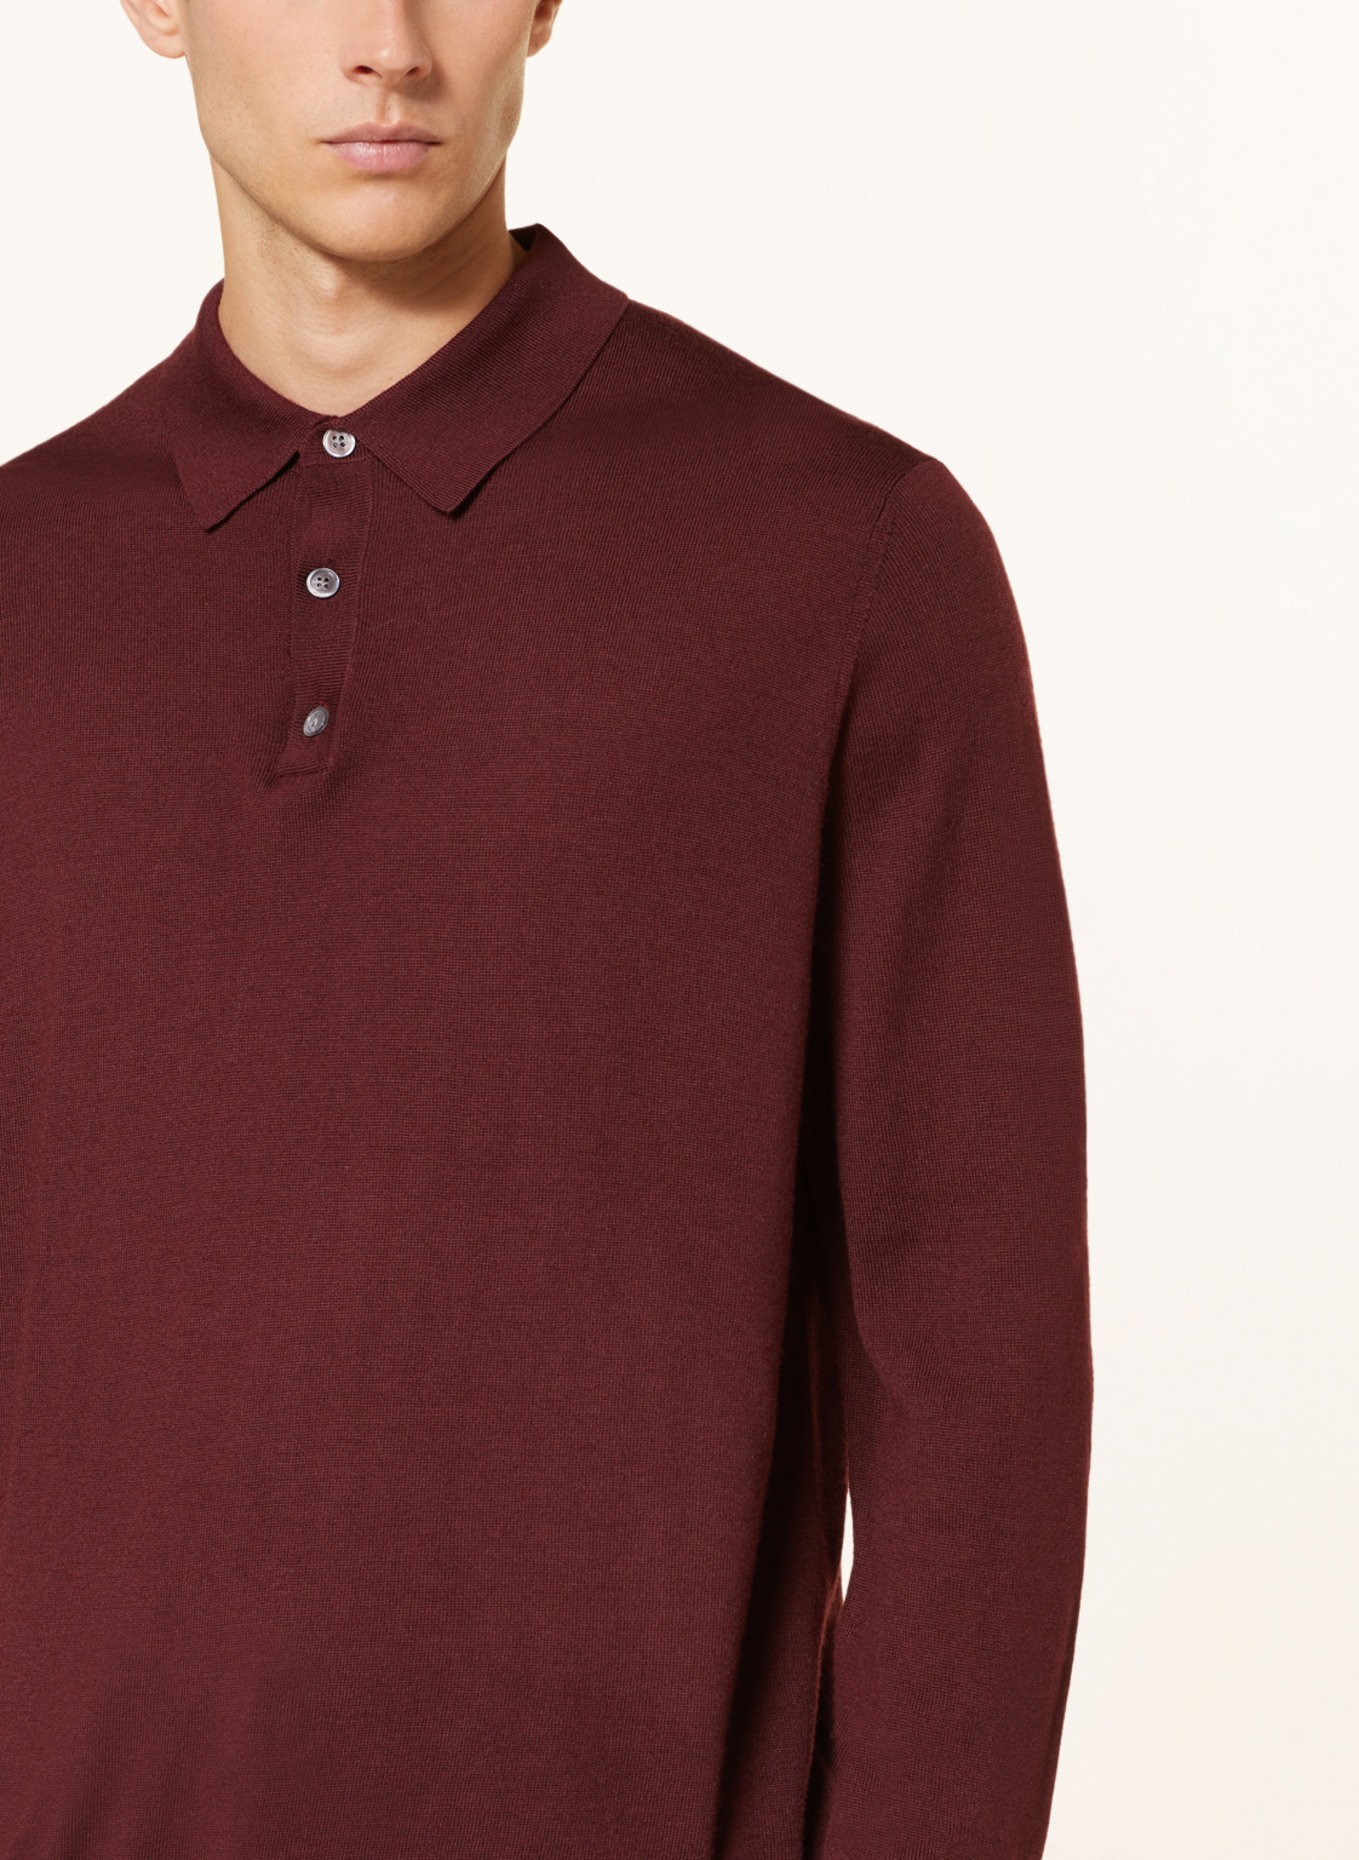 STROKESMAN'S Knitted polo shirt made of merino wool, Color: DARK RED (Image 4)